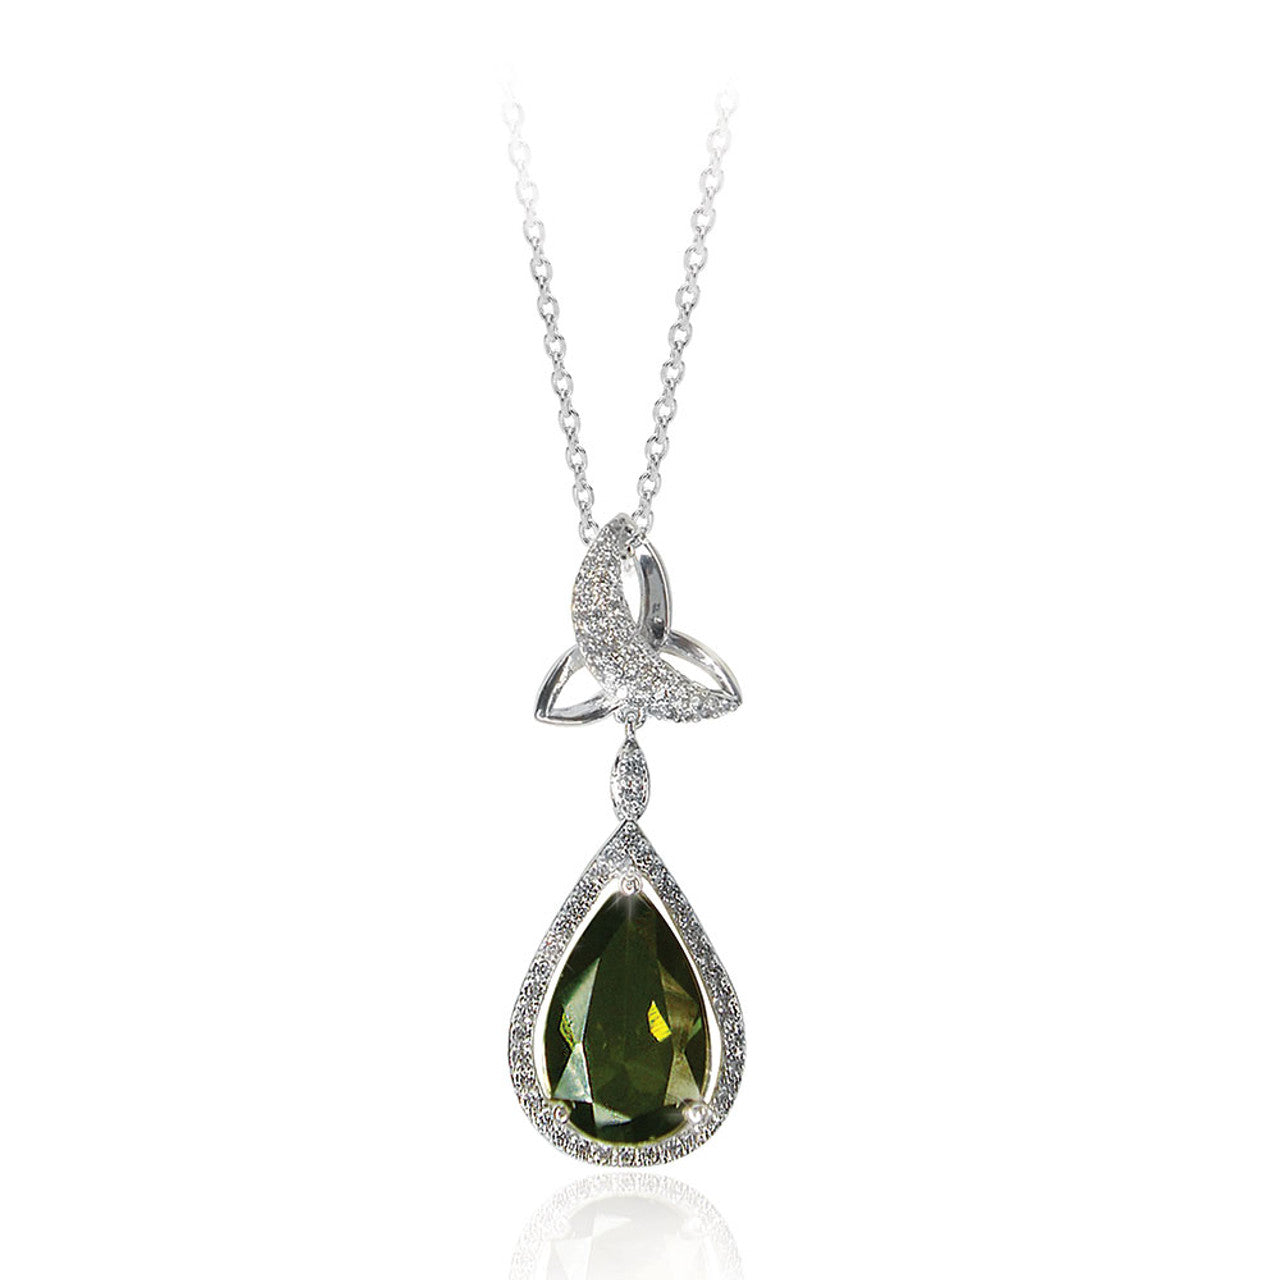 Tipperary Crystal Maureen O'Hara Silver Trinity Knot Necklace  This elegant trinity knot pendant will take your breath away. Fashioned in silver it features a clear crystal lined trinity knot symbol from which the exquisite emerald green pear-shaped drop suspends. A halo of shimmering clear crystal accents completely surround the centre stone adding even more dazzle.